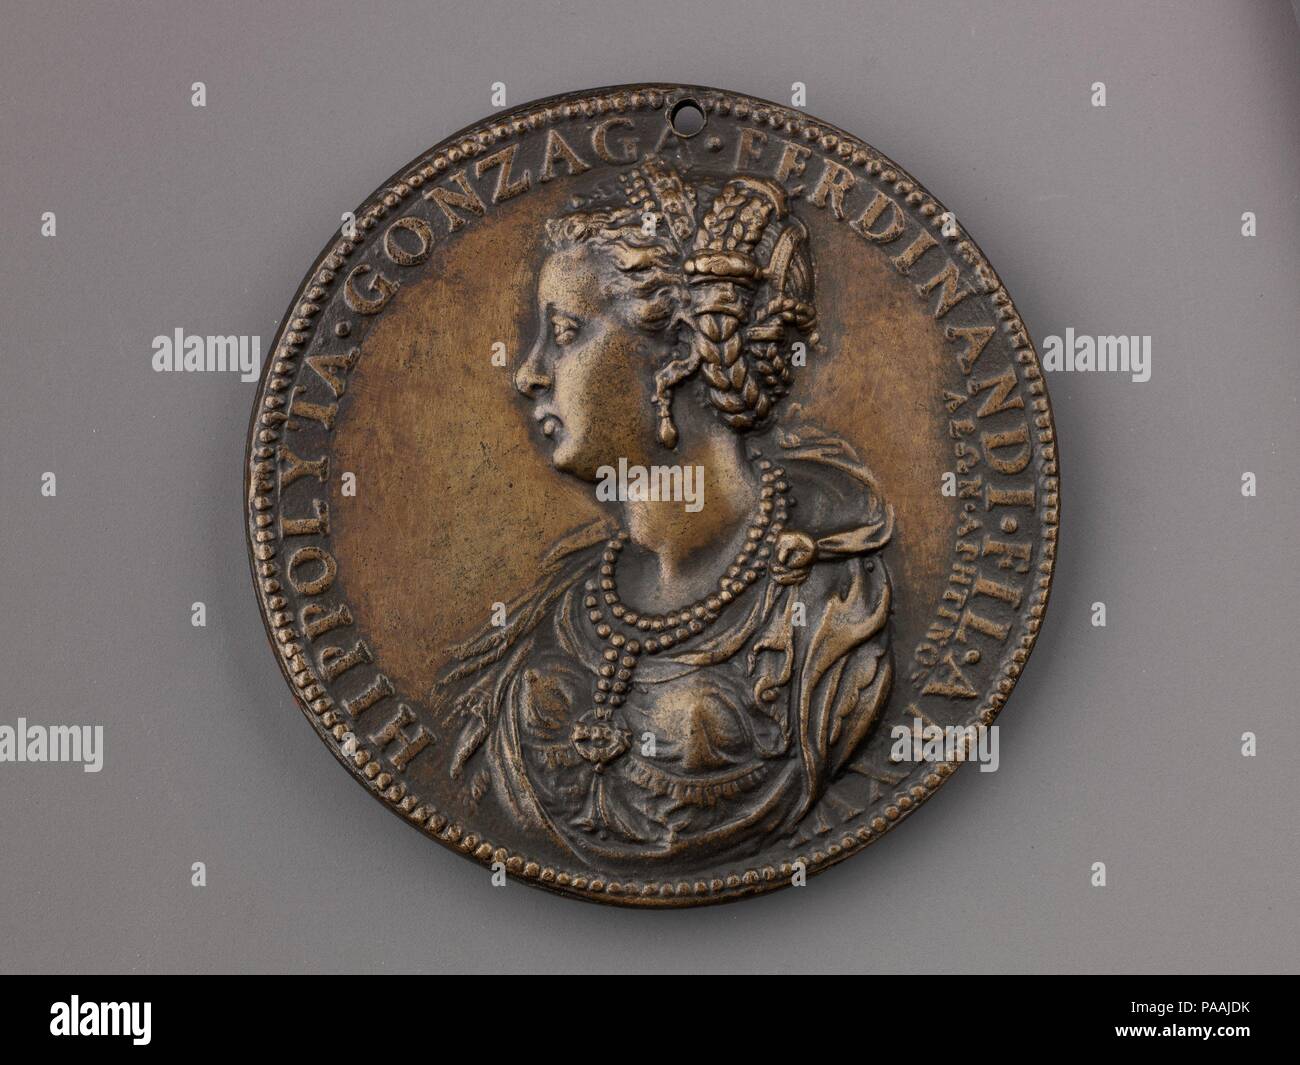 Medal:  Ippolita Gonzaga. Artist: Leone Leoni (Italian, Menaggio ca. 1509-1590 Milan). Dimensions: Diam. 6.6 cm, wt. 75.96 g.. Date: model 1551 (possibly cast 19th century).  On the obverse is a portrait of Ippolita Gonzaga of Mantua (1535 -  1563), wife of Antonio Gonzaga. On the reverse is  Diana, blowing a conch shell and holding a large arrow.  She is accompanied by two of her dogs. Behind her is  Pluto, abducting Proserpina with Cerberus at his feet.  This late aftercast may be from the nineteenth century. Museum: Metropolitan Museum of Art, New York, USA. Stock Photo